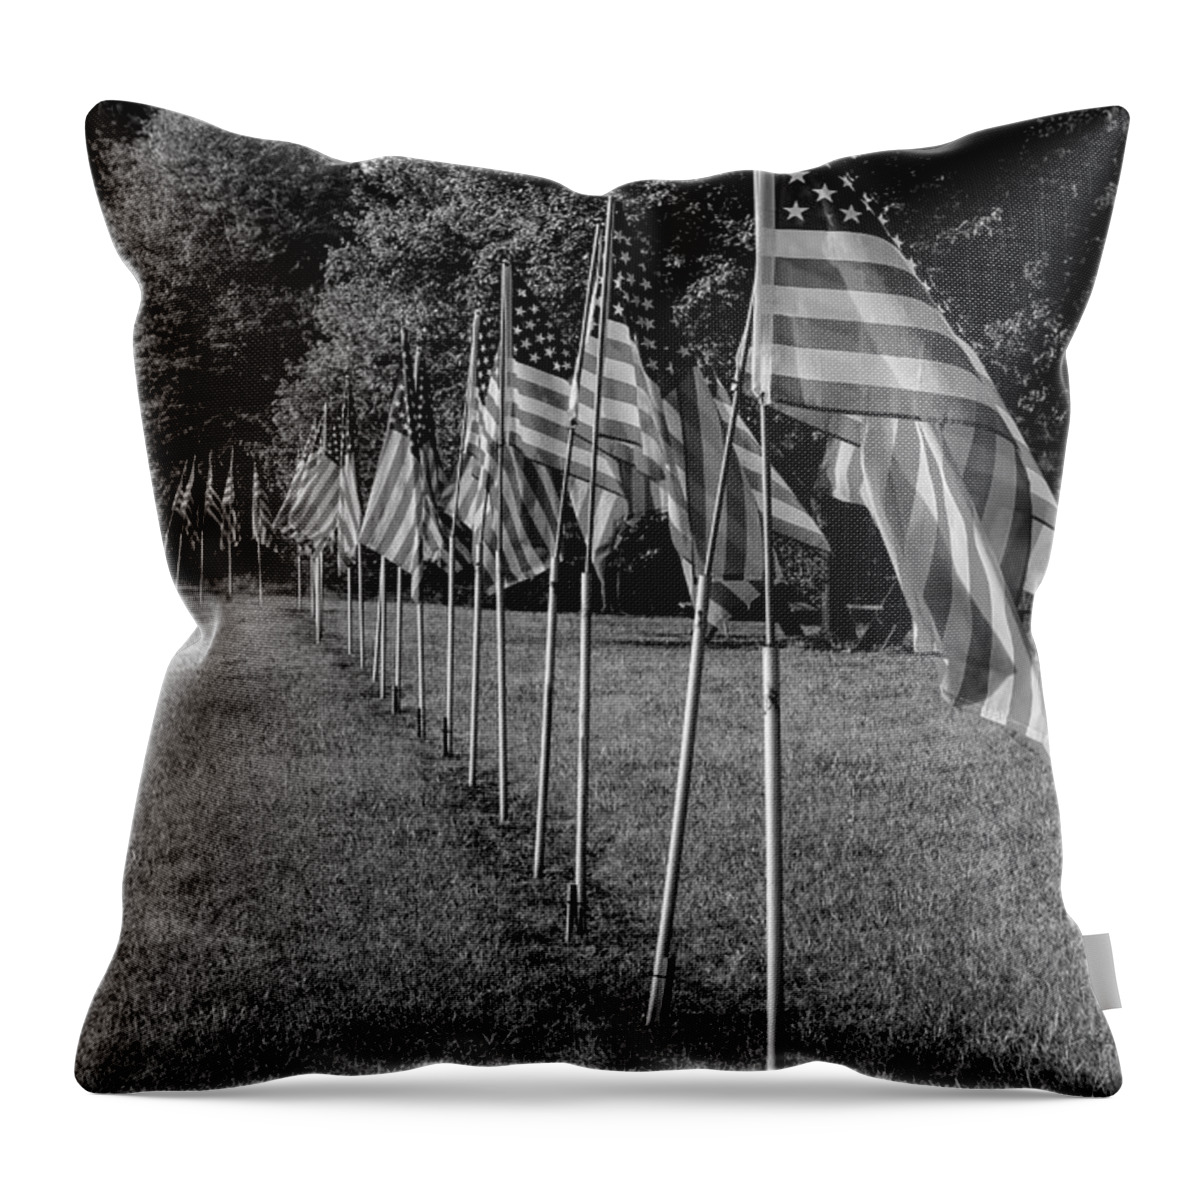 American Throw Pillow featuring the photograph Honoring Service Men in Black and White by Ester McGuire